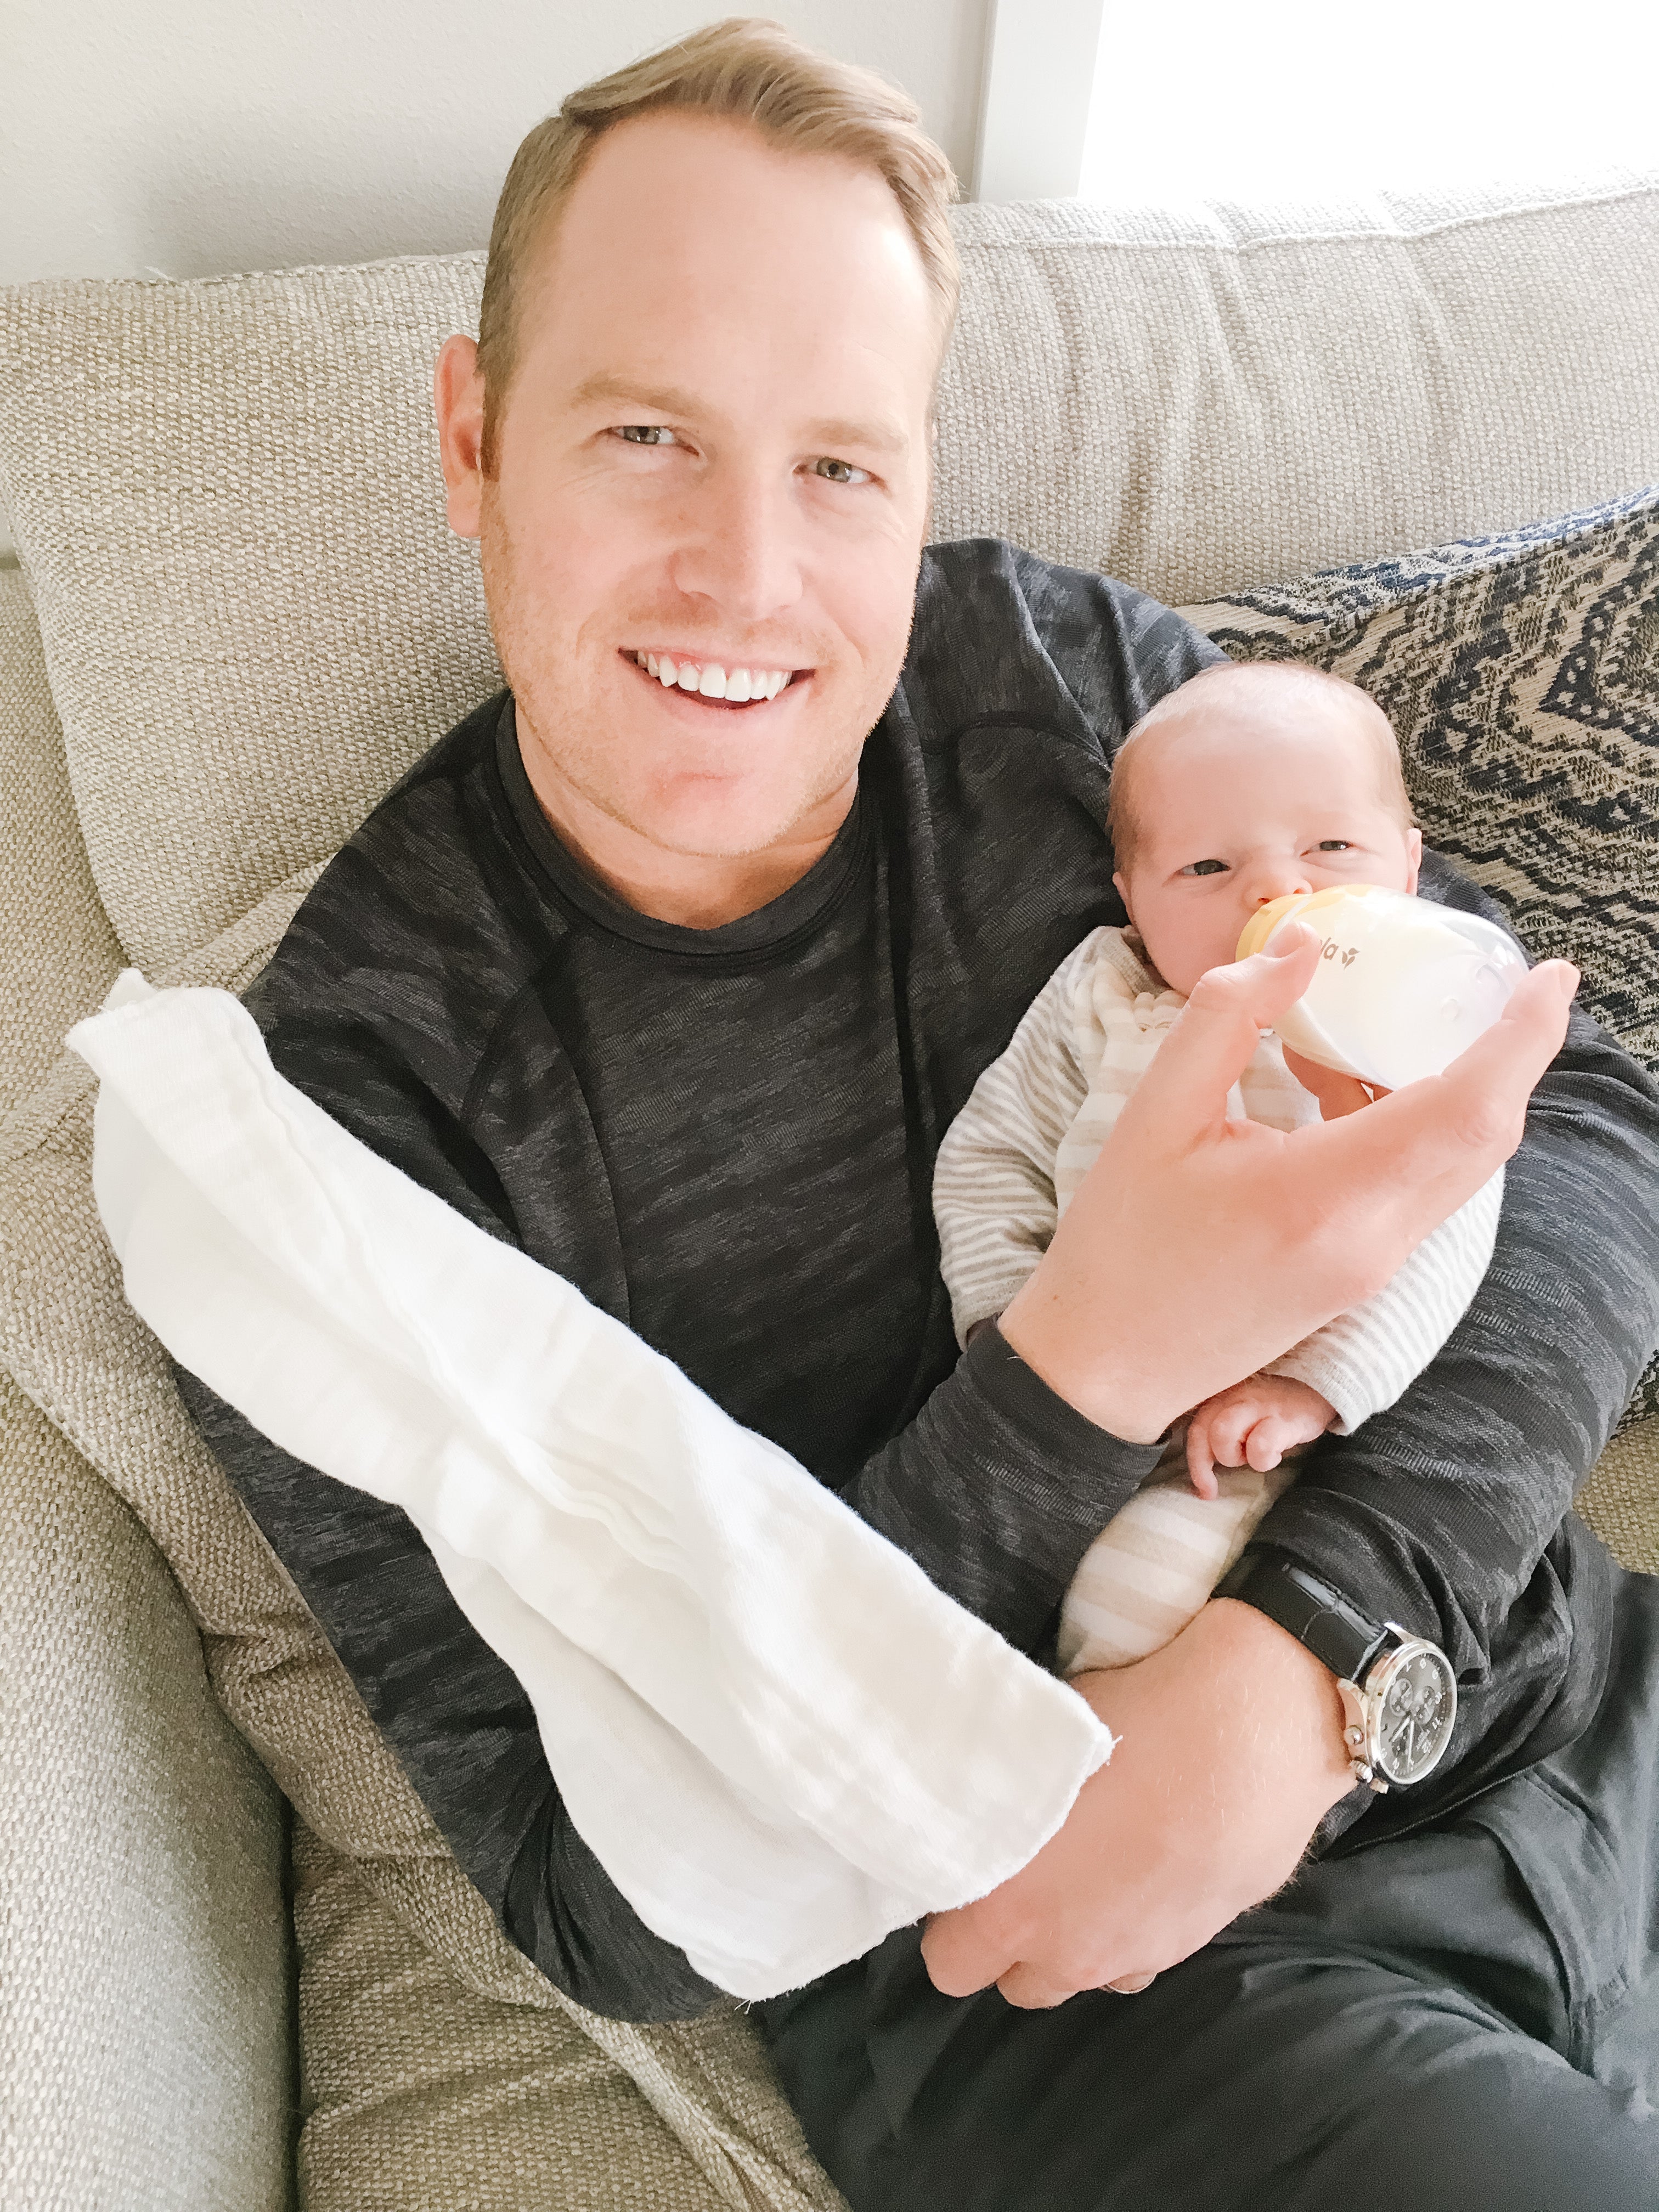 5 Tactical things dads can do to help with a new baby